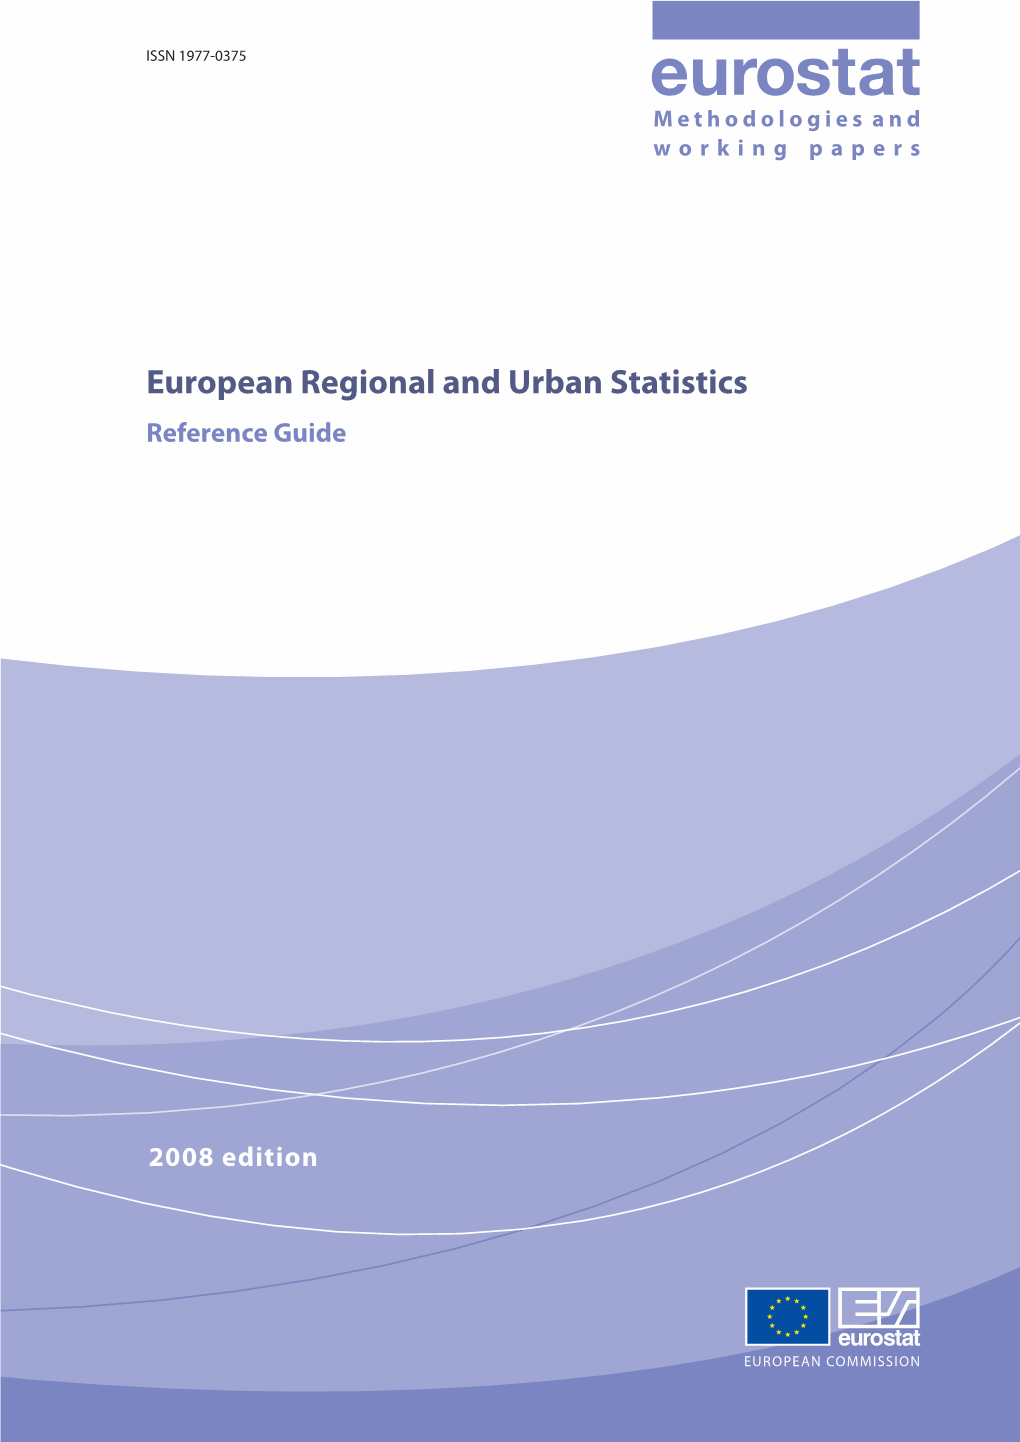 European Regional and Urban Statistics Reference Guide